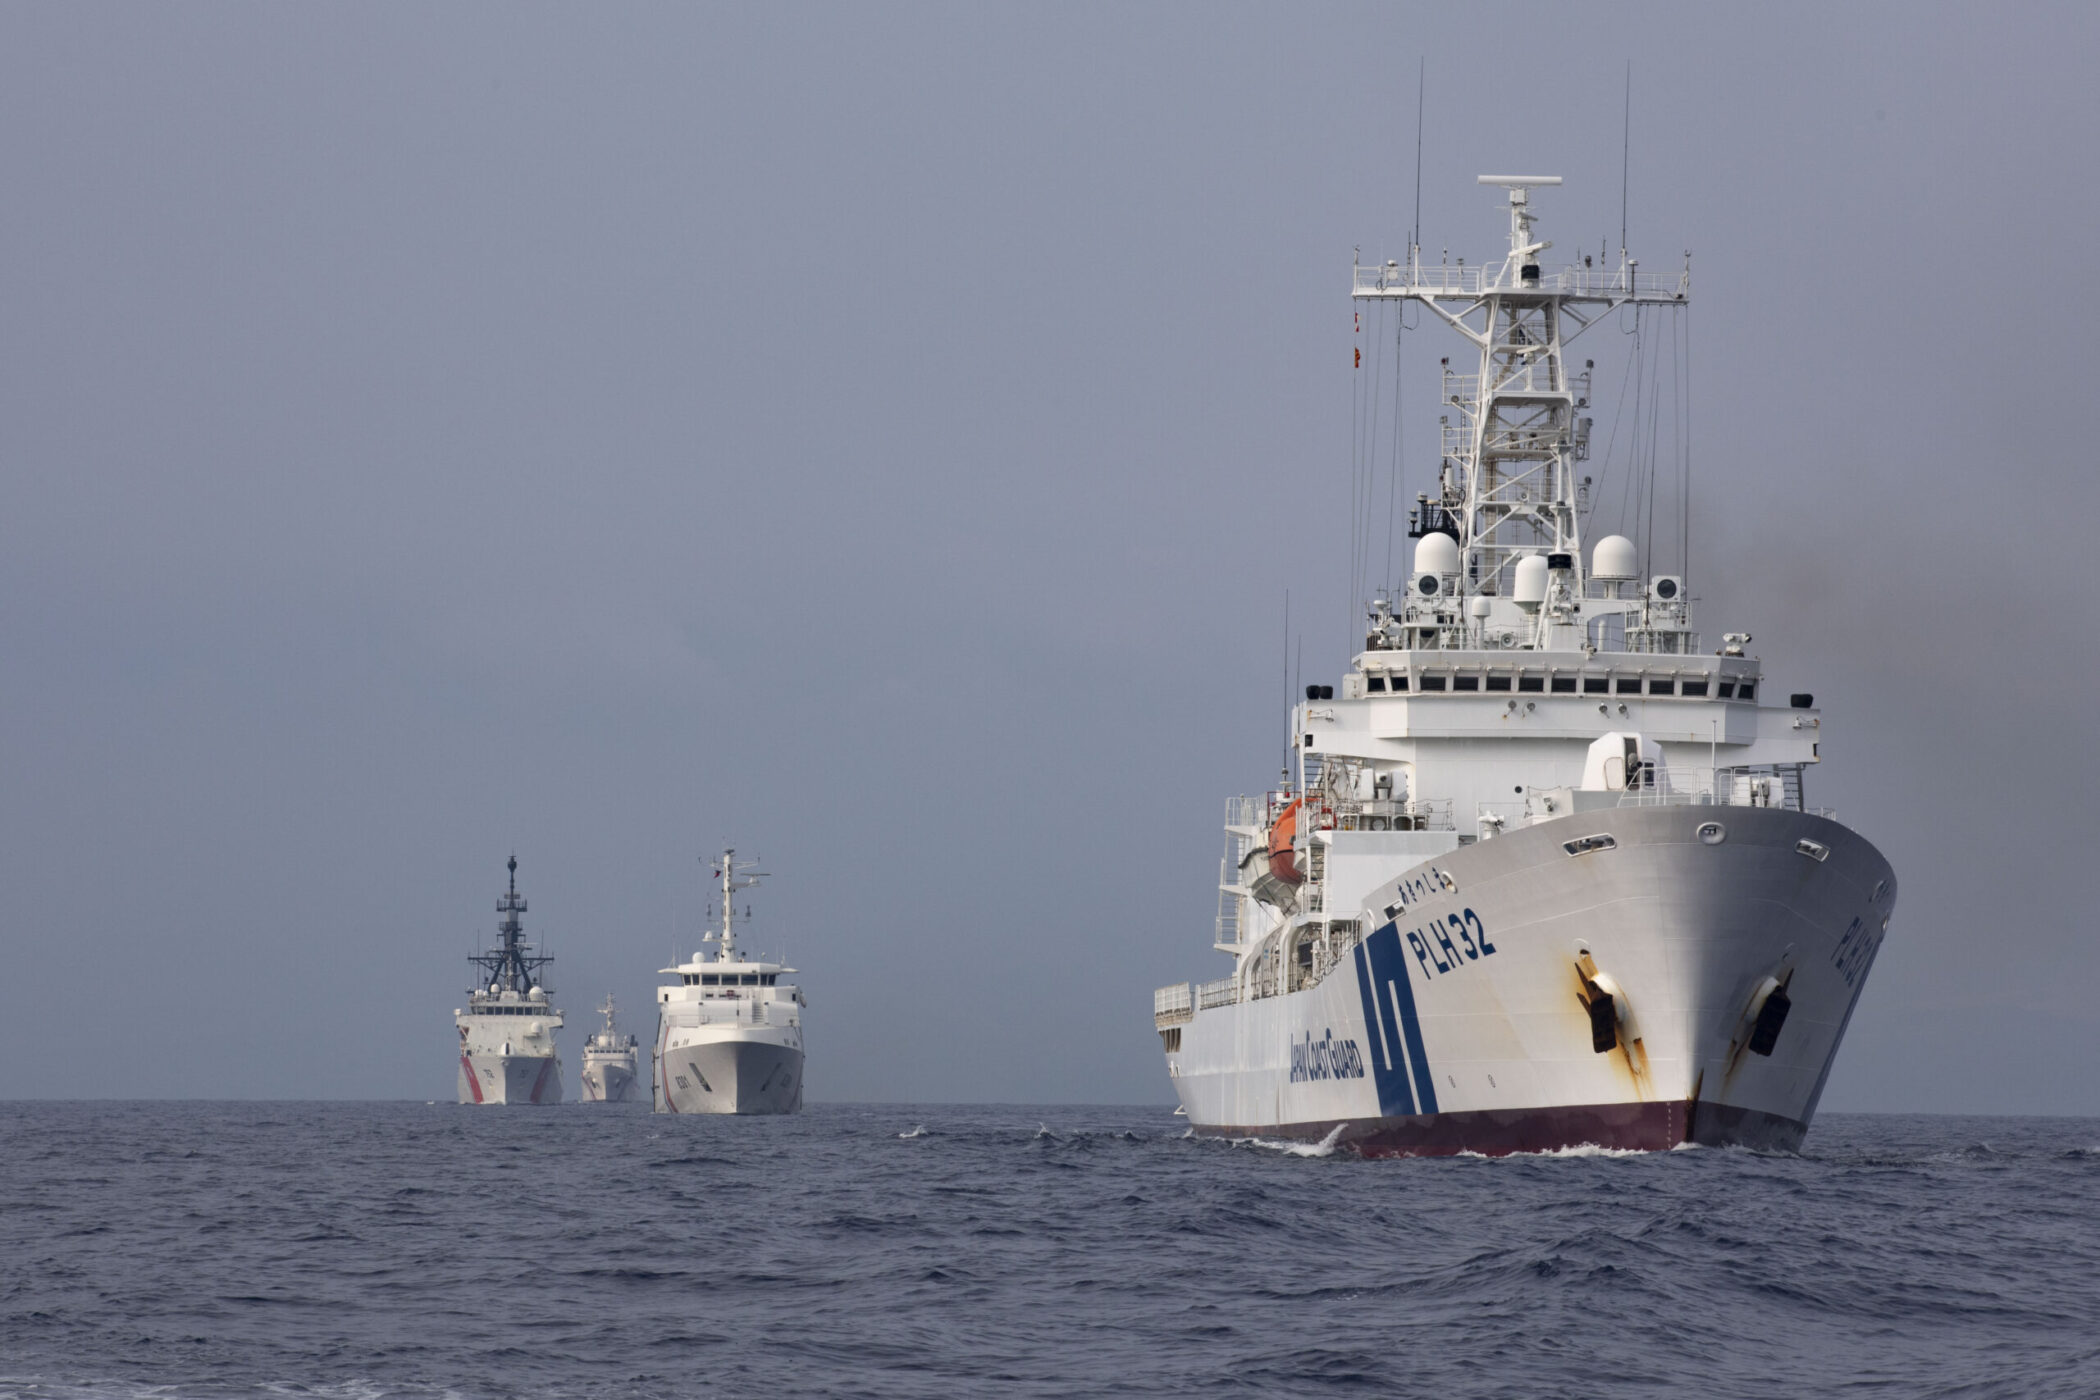 Japan’s Security Engagement with the Philippines